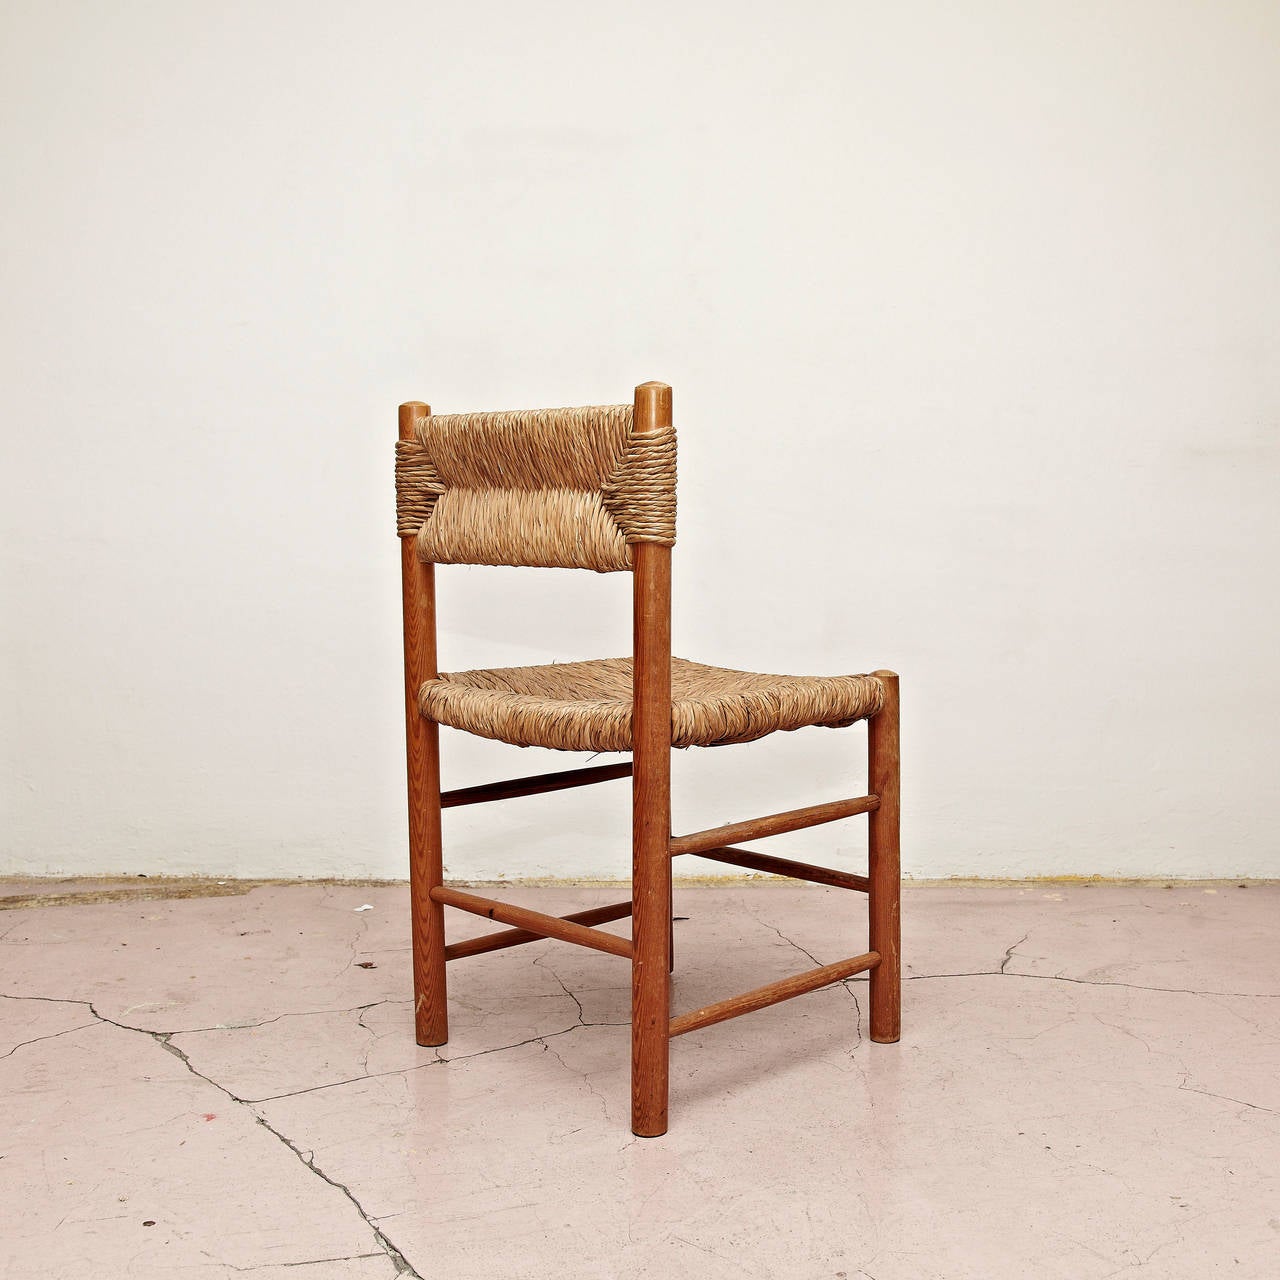 French Charlotte Perriand Chair, circa 1950